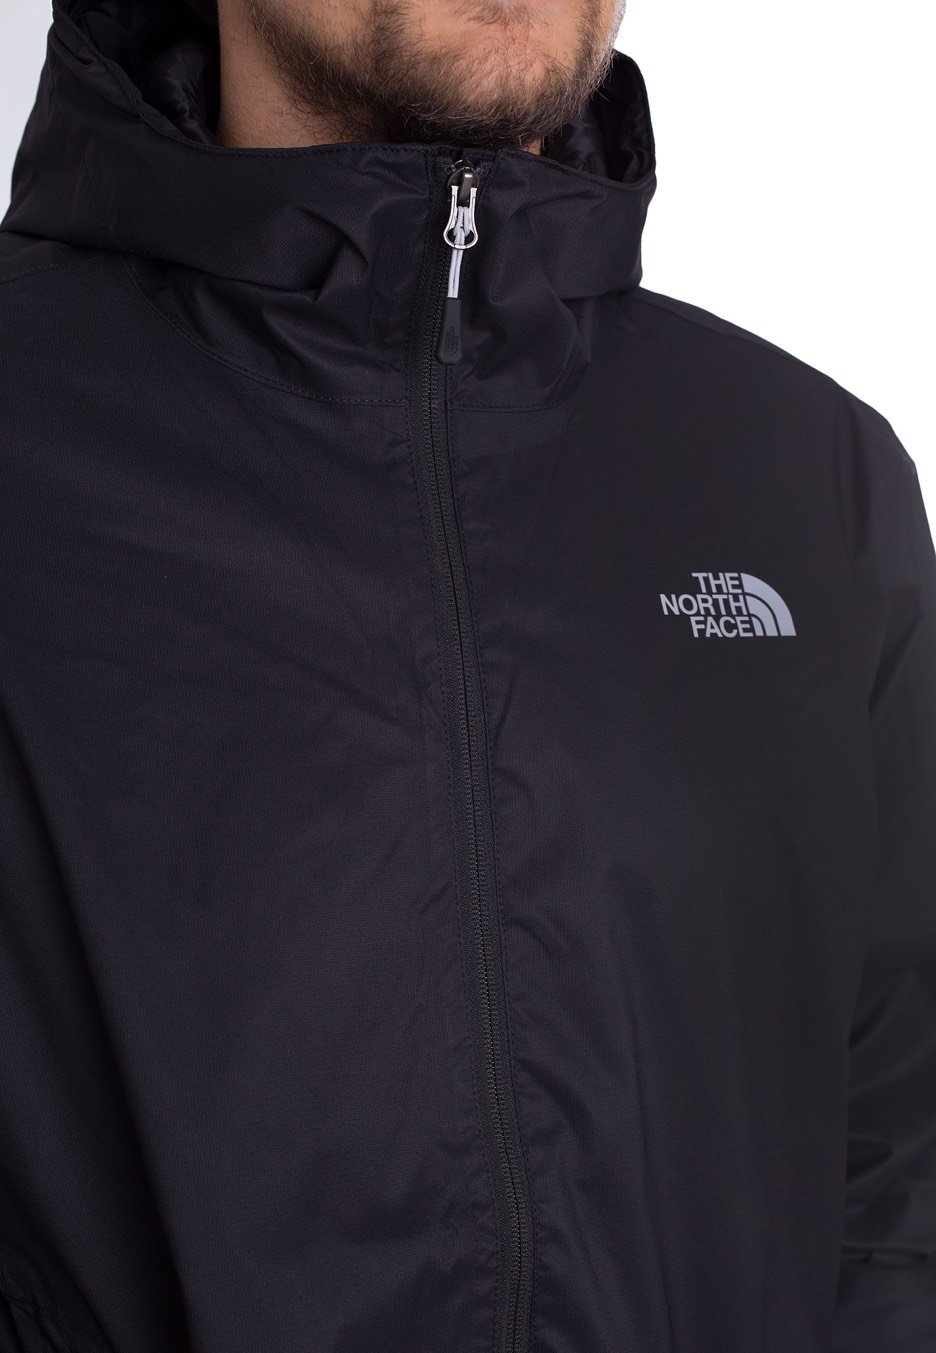 The North Face - Quest - Jacket